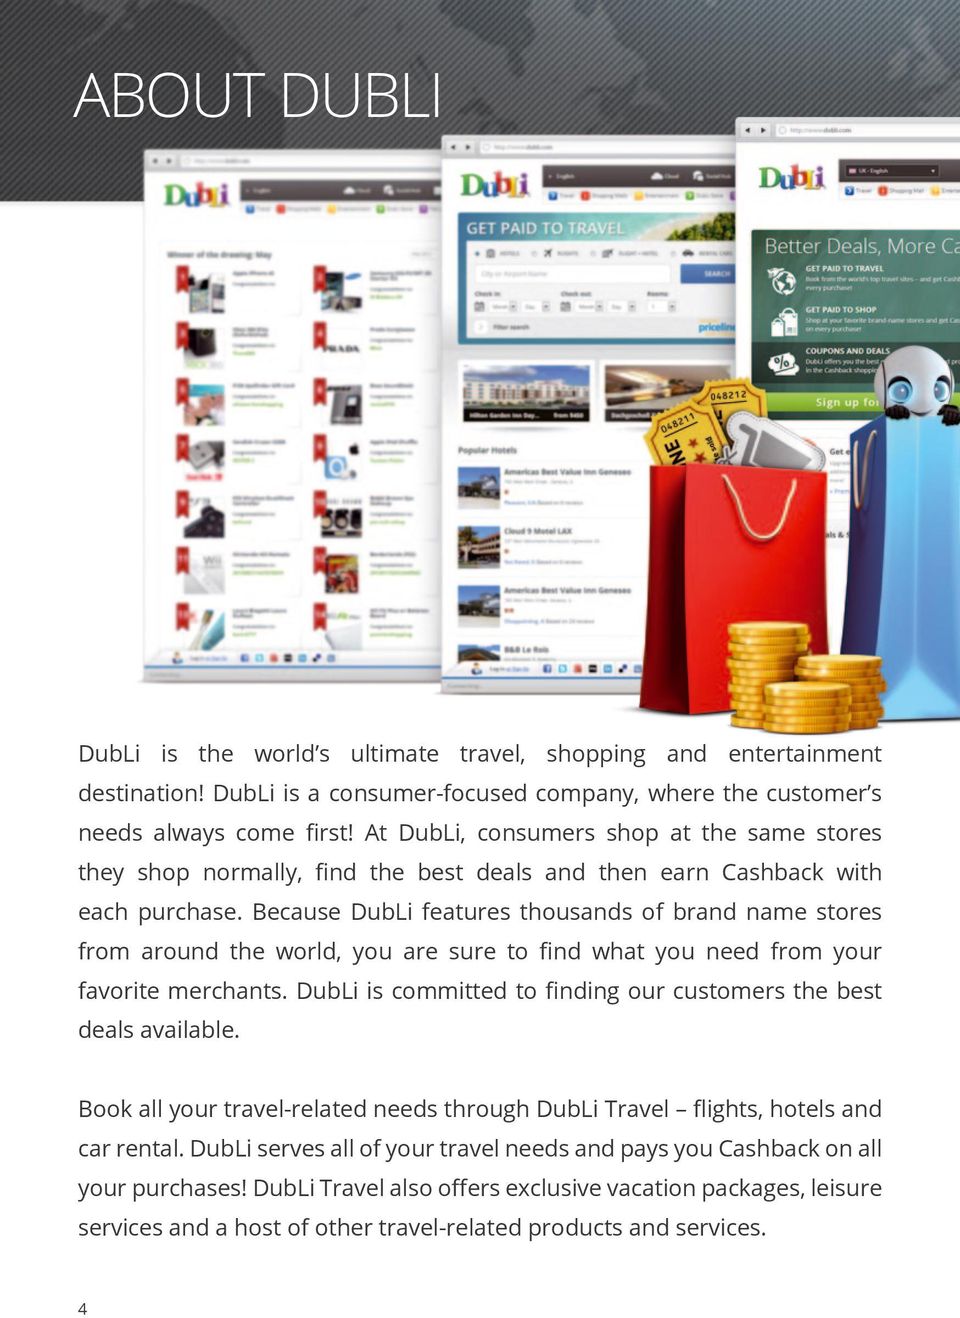 Because DubLi features thousands of brand name stores from around the world, you are sure to find what you need from your favorite merchants.